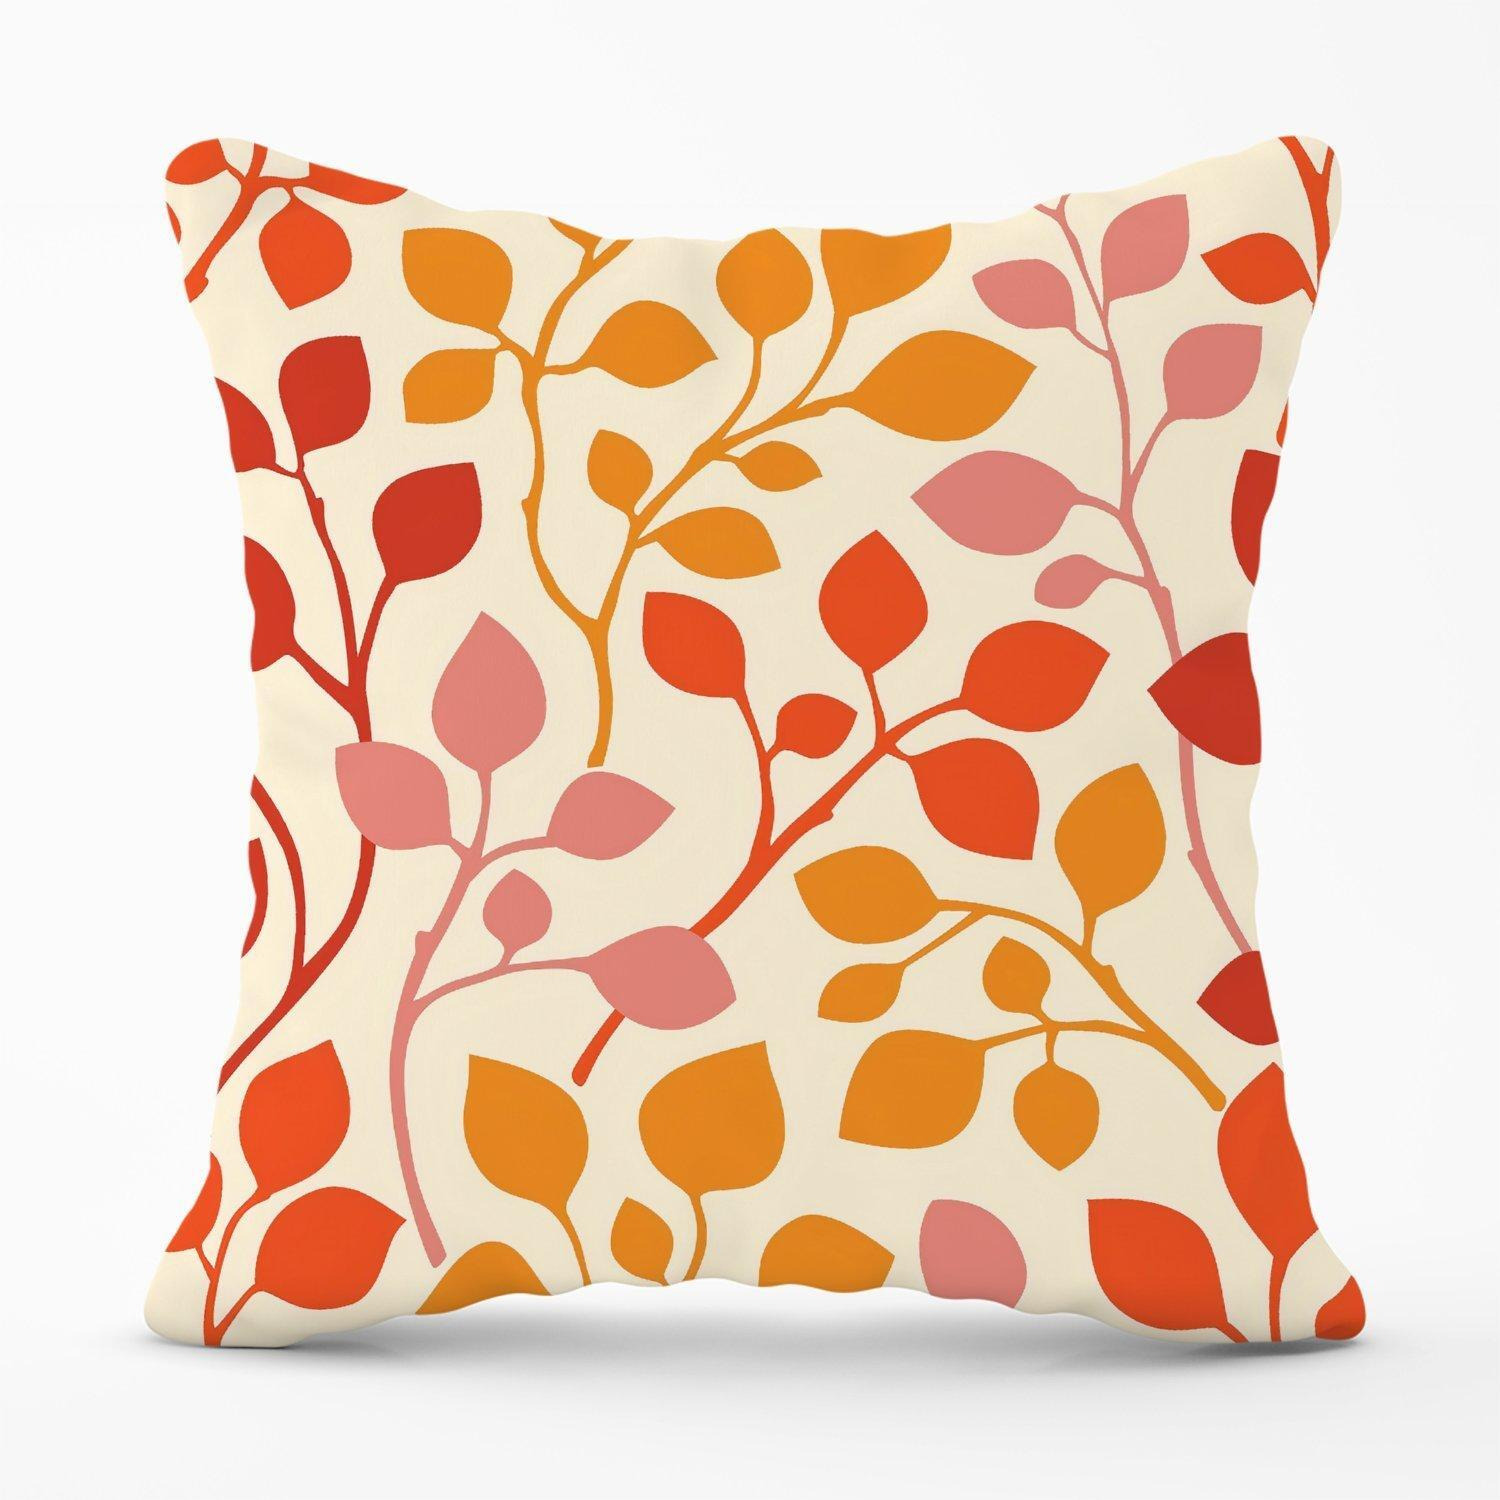 Colorful Autumn Leaves Outdoor Cushion - image 1